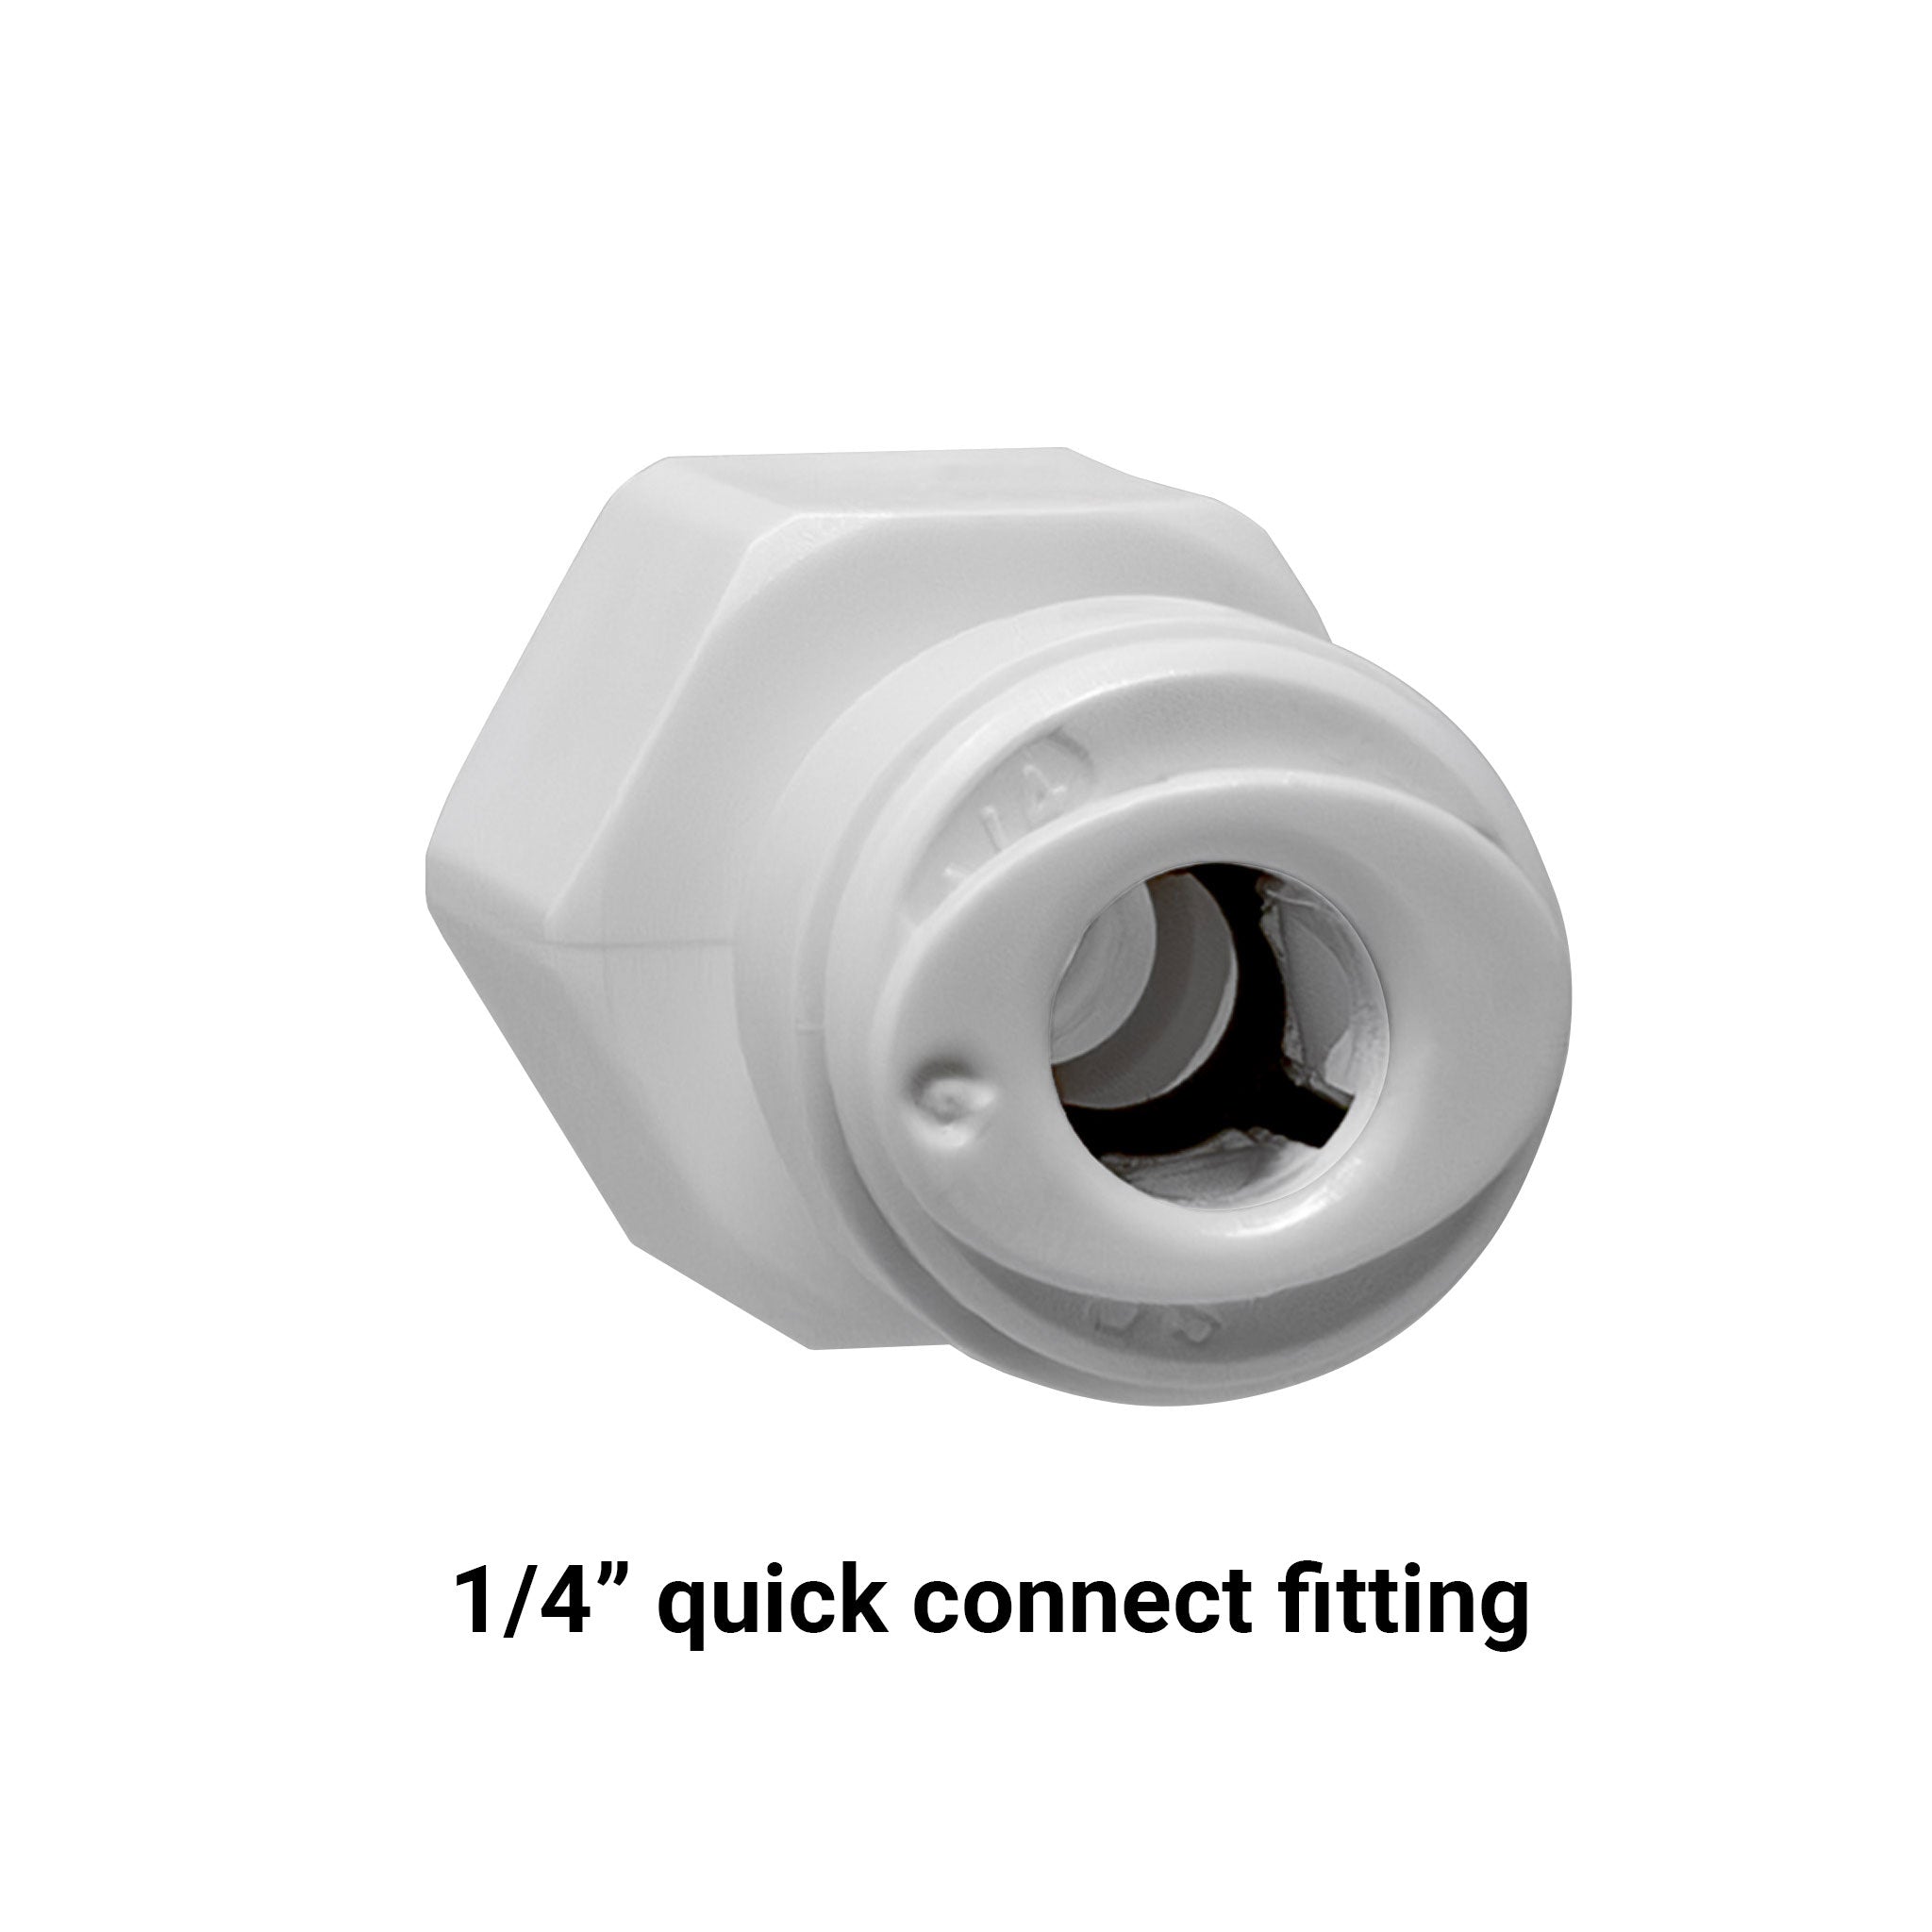 1/4" Universal Reverse Osmosis Quick Connect Faucet Adapter